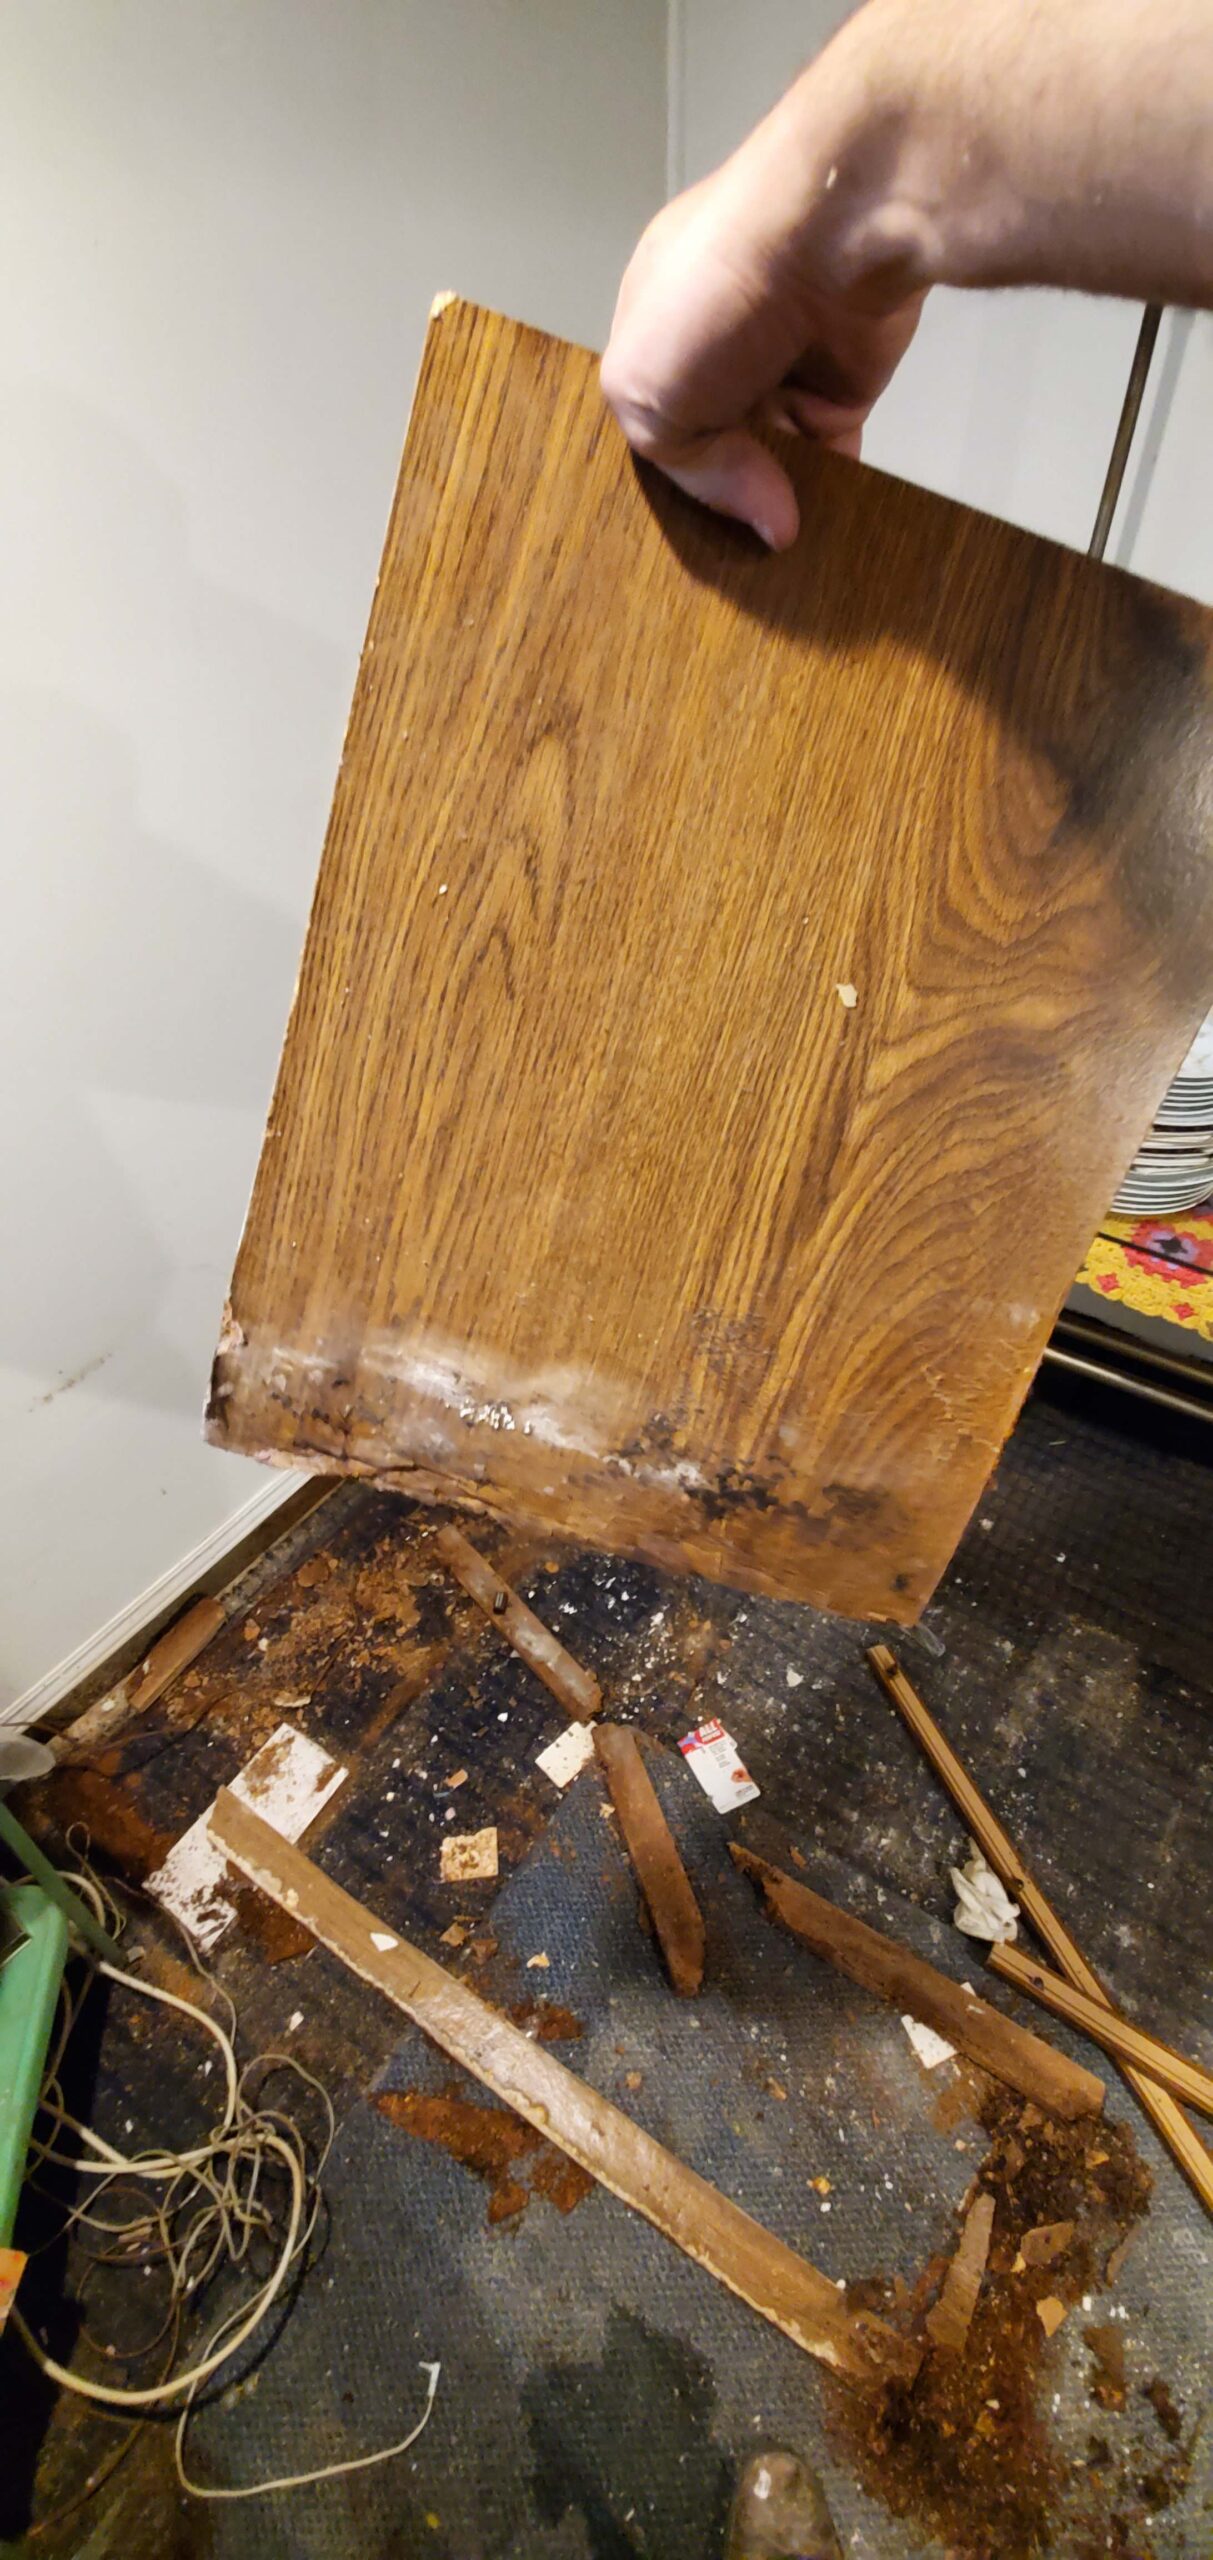 water and fire damage restoration in queens ny 11414